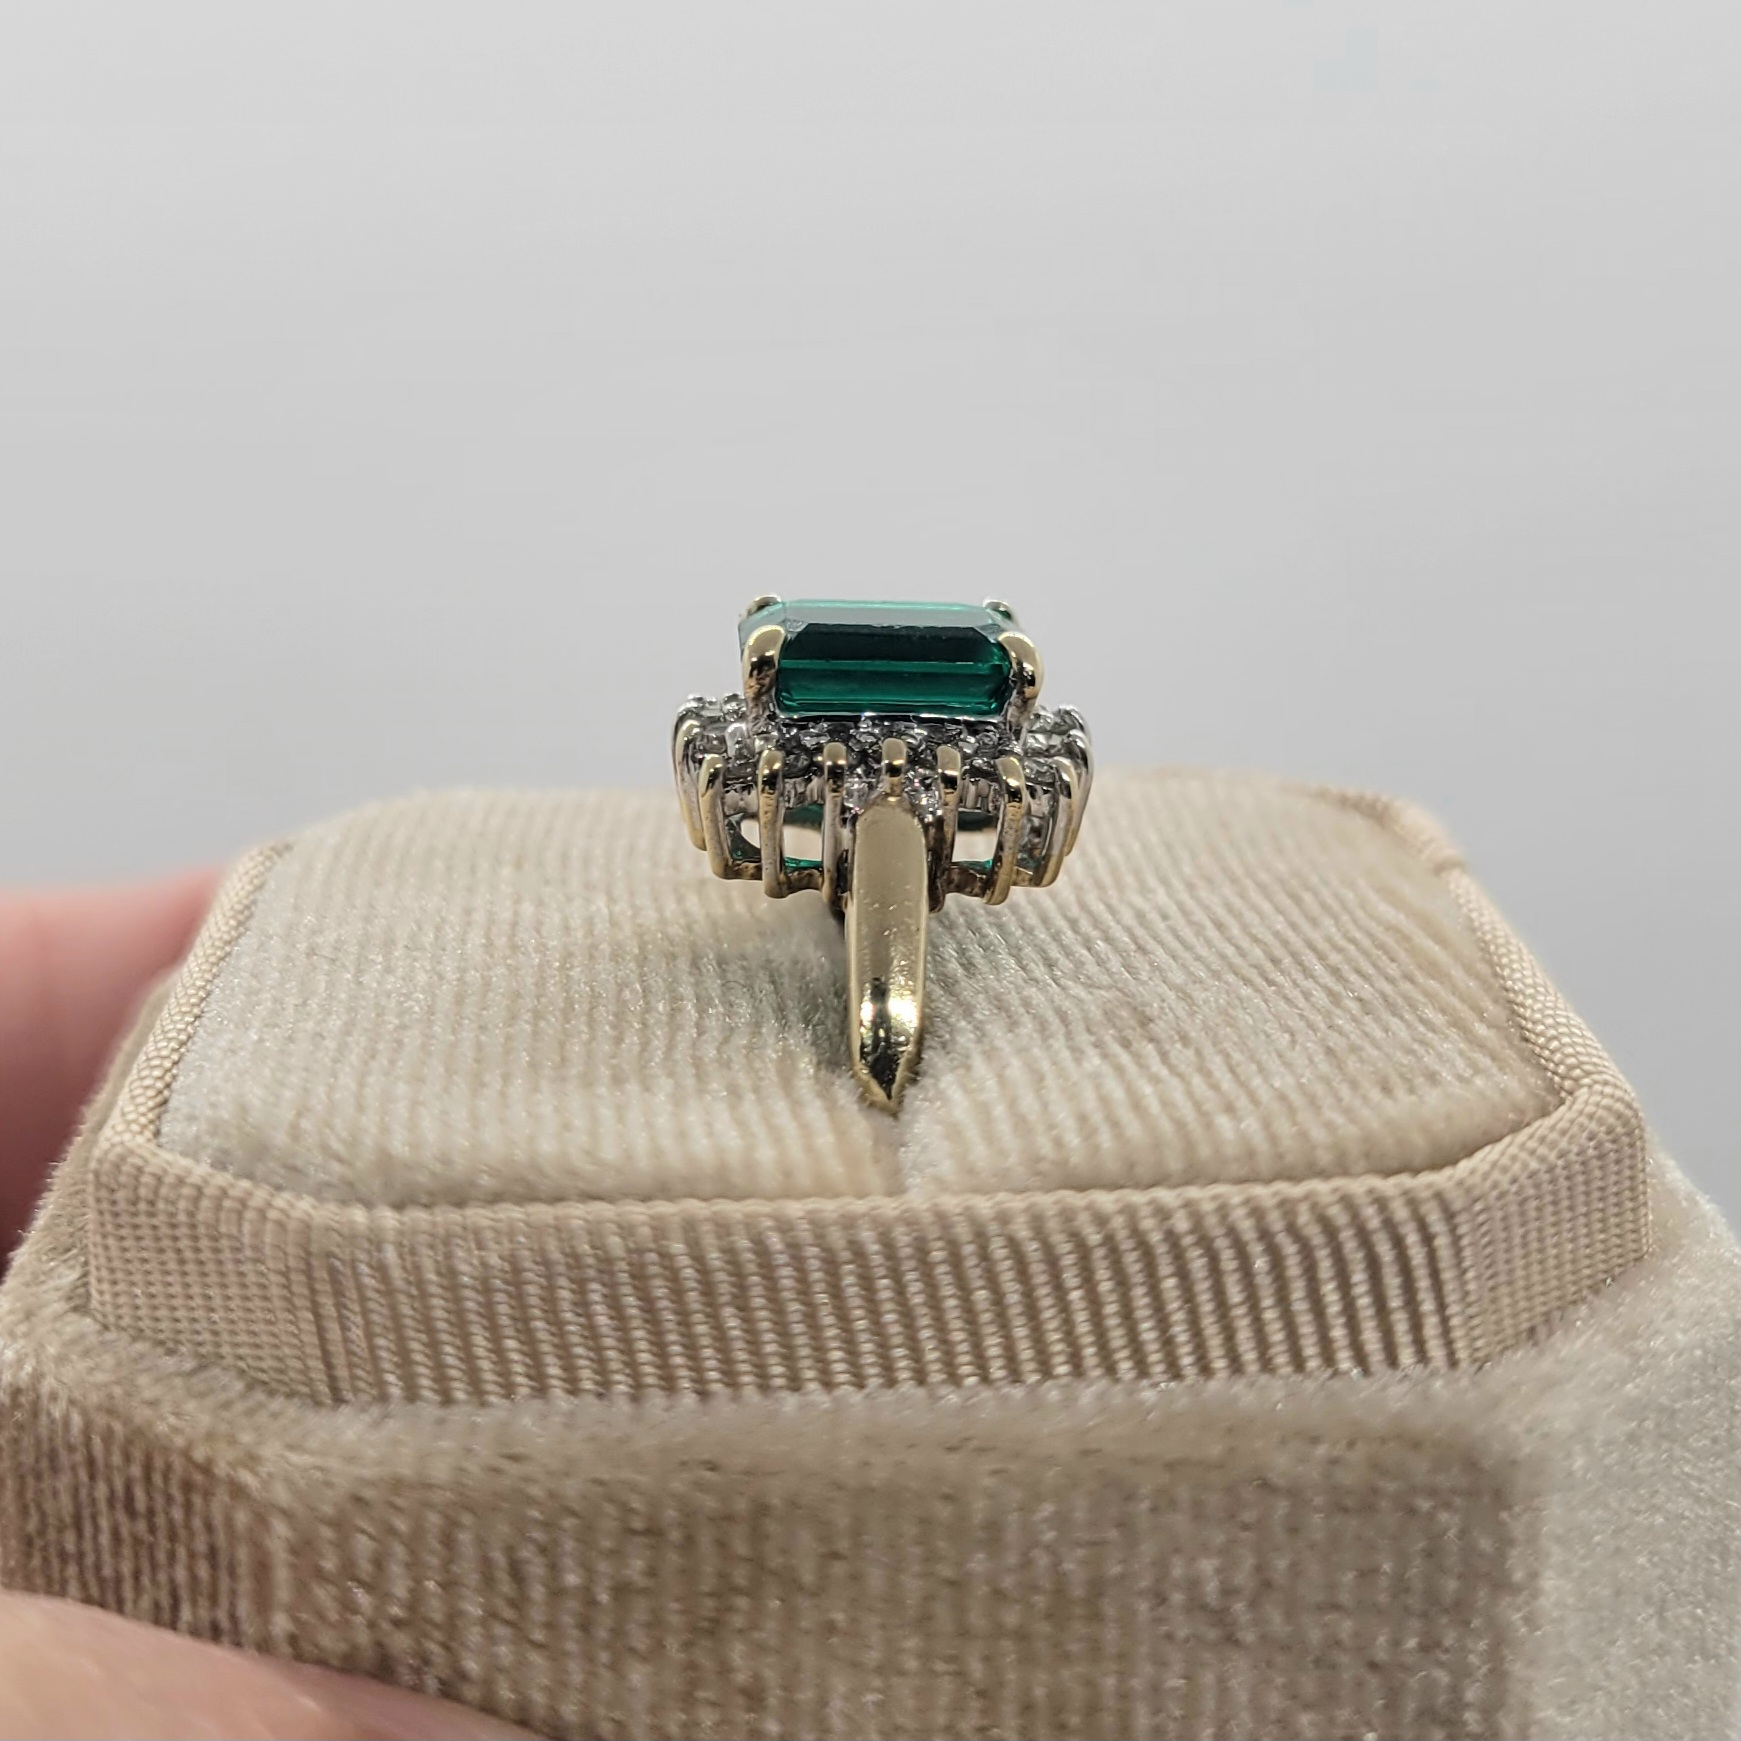 Vintage Emerald and Diamond 10K Yellow Gold Ring